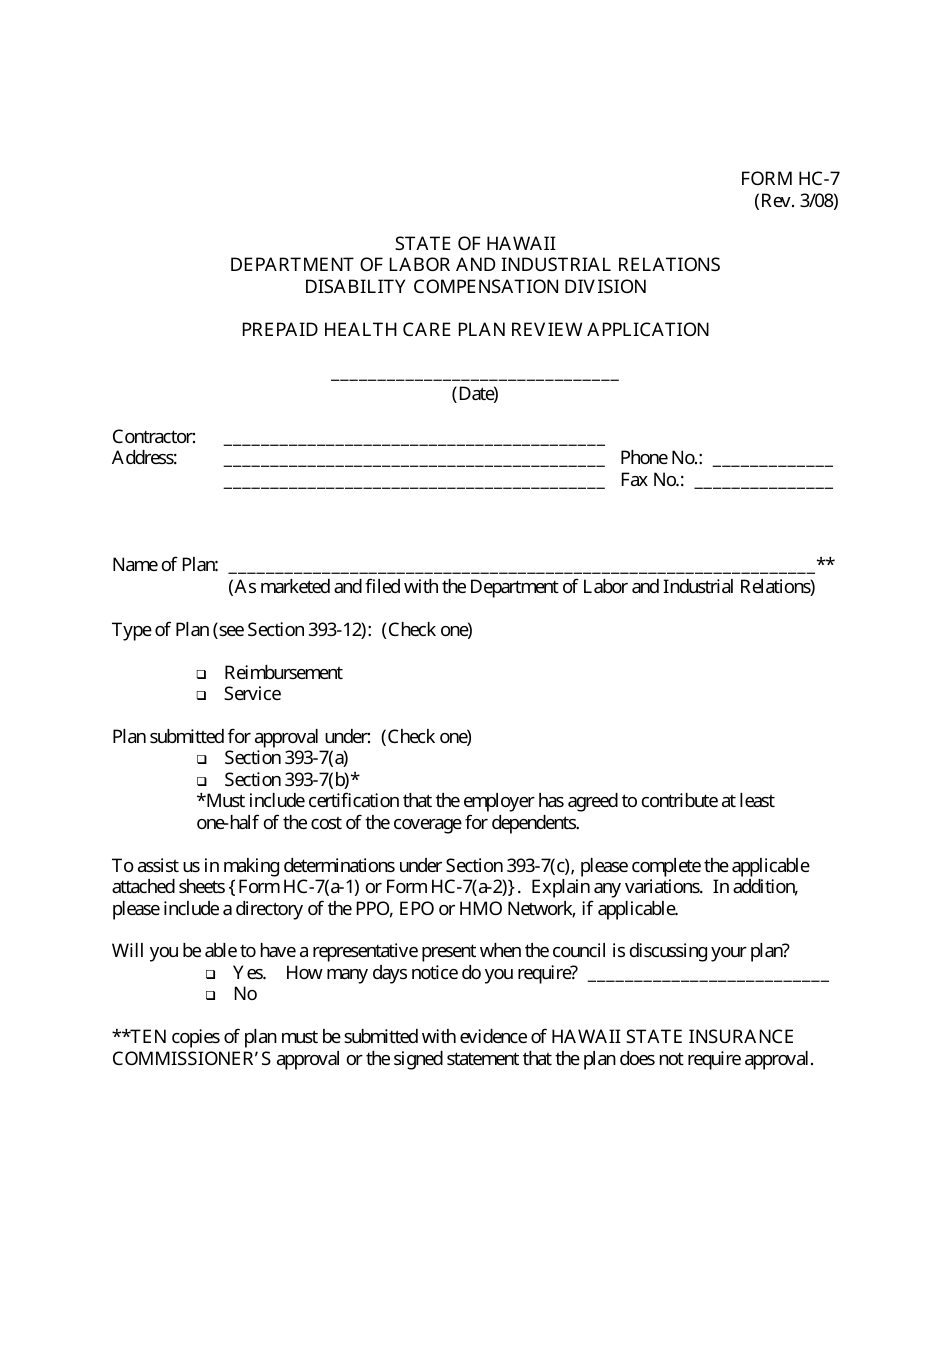 Form HC-7 Prepaid Health Care Plan Review Application - Hawaii, Page 1